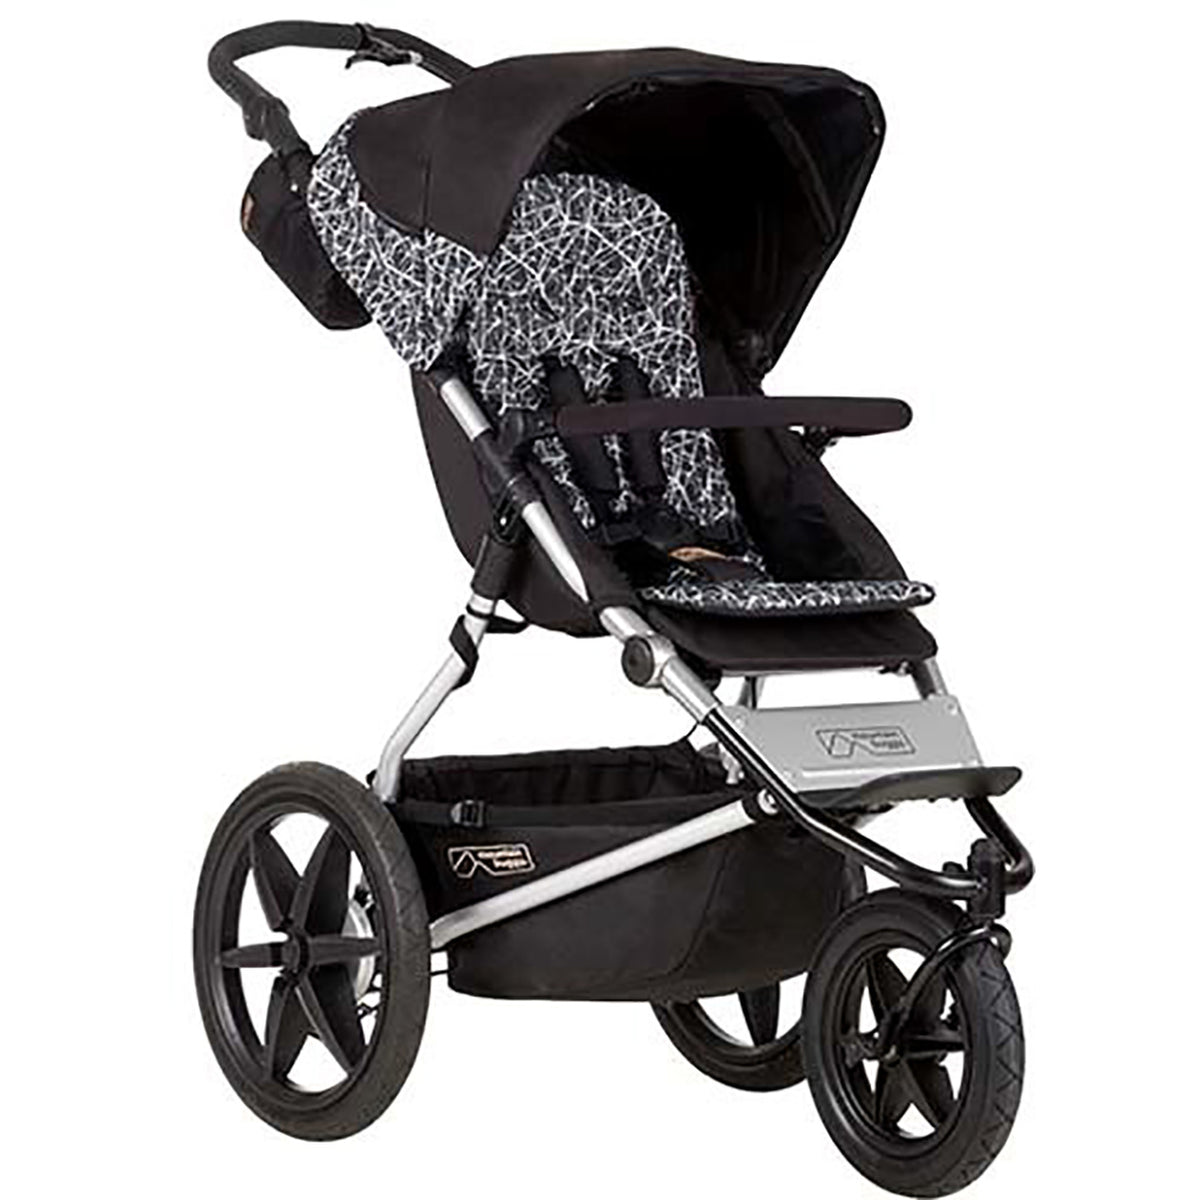 Mountain Buggy Terrain Jogging Pushchair - Includes Storm Cover - Happy Baby